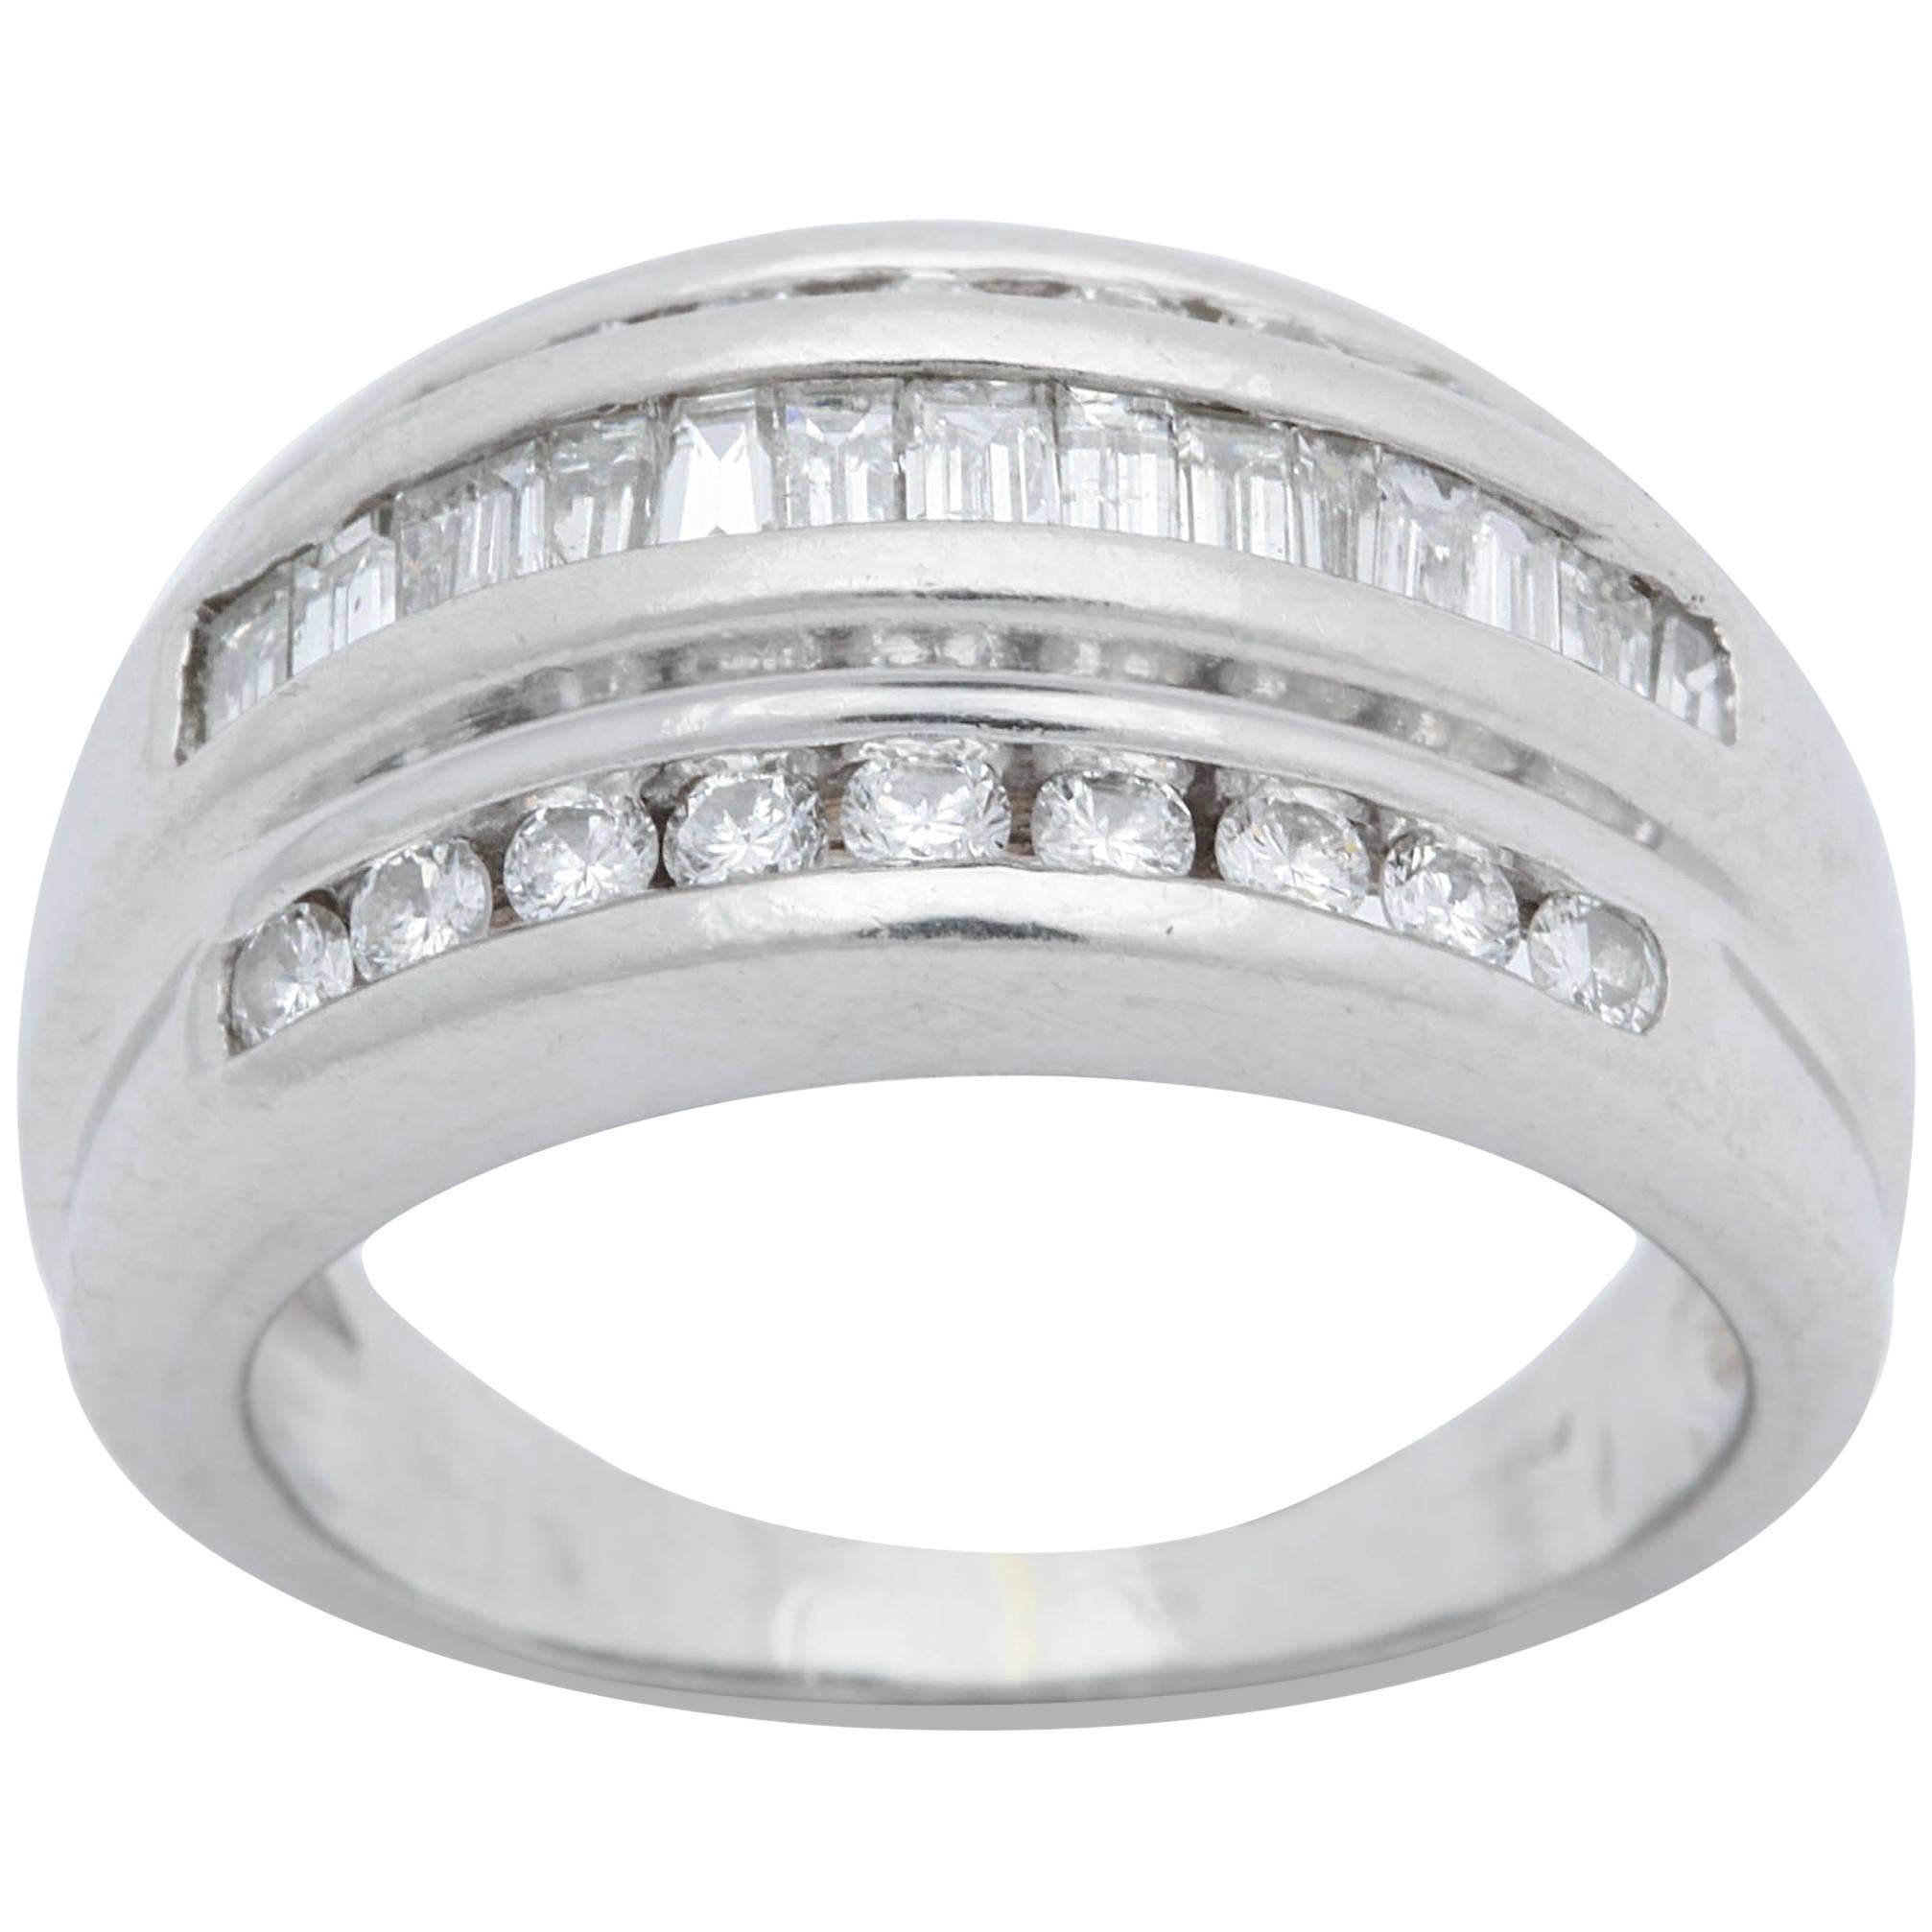 1950s Bombe Half Way Band Baguette with Round Cut Diamonds Platinum Ring For Sale